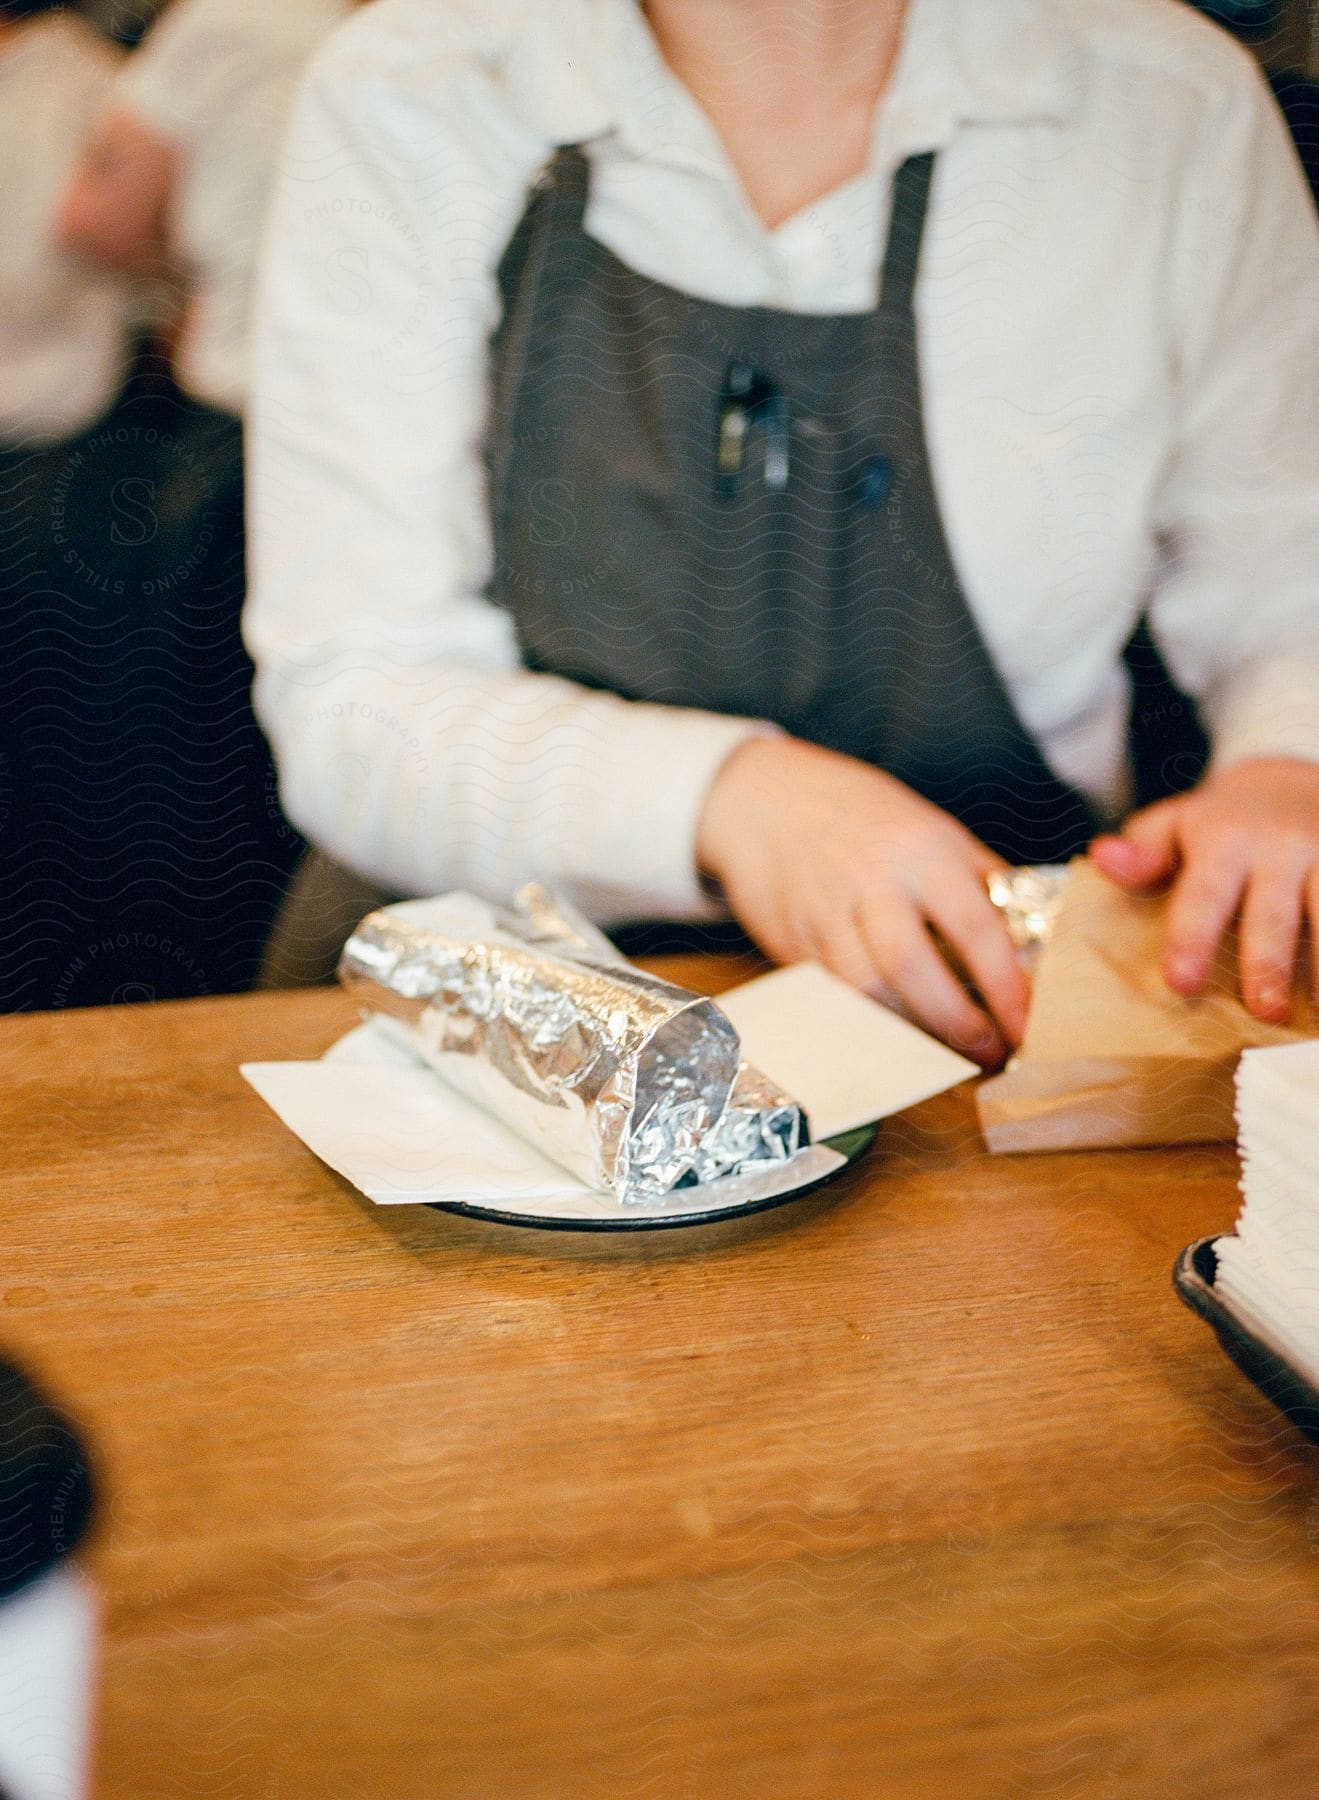 A waitress is standing at a table with food wrapped in foil on a plate